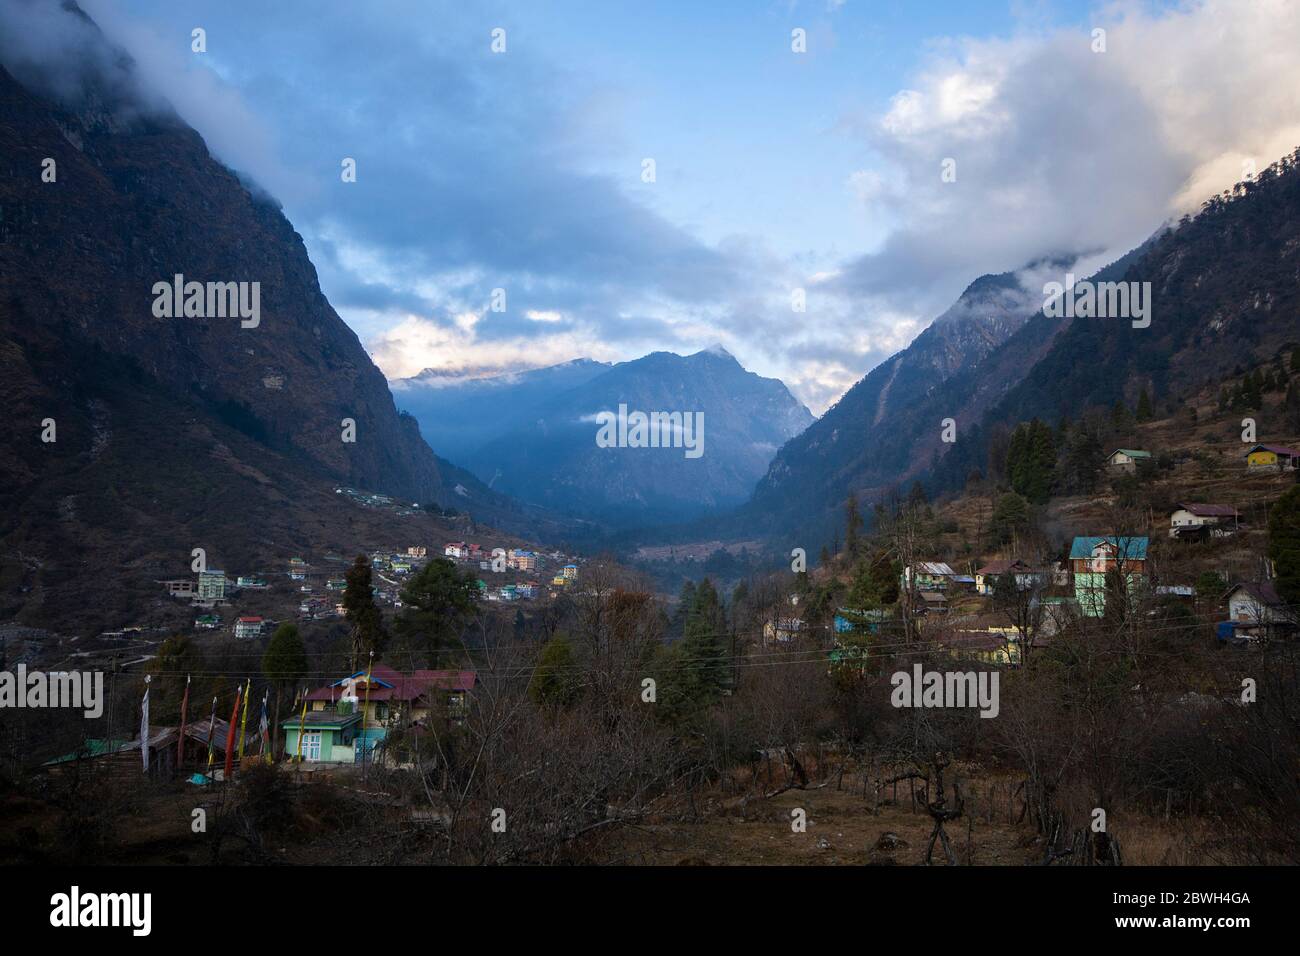 Village in valley in north of India, Himalaya Mountain Range, landscape photography Stock Photo